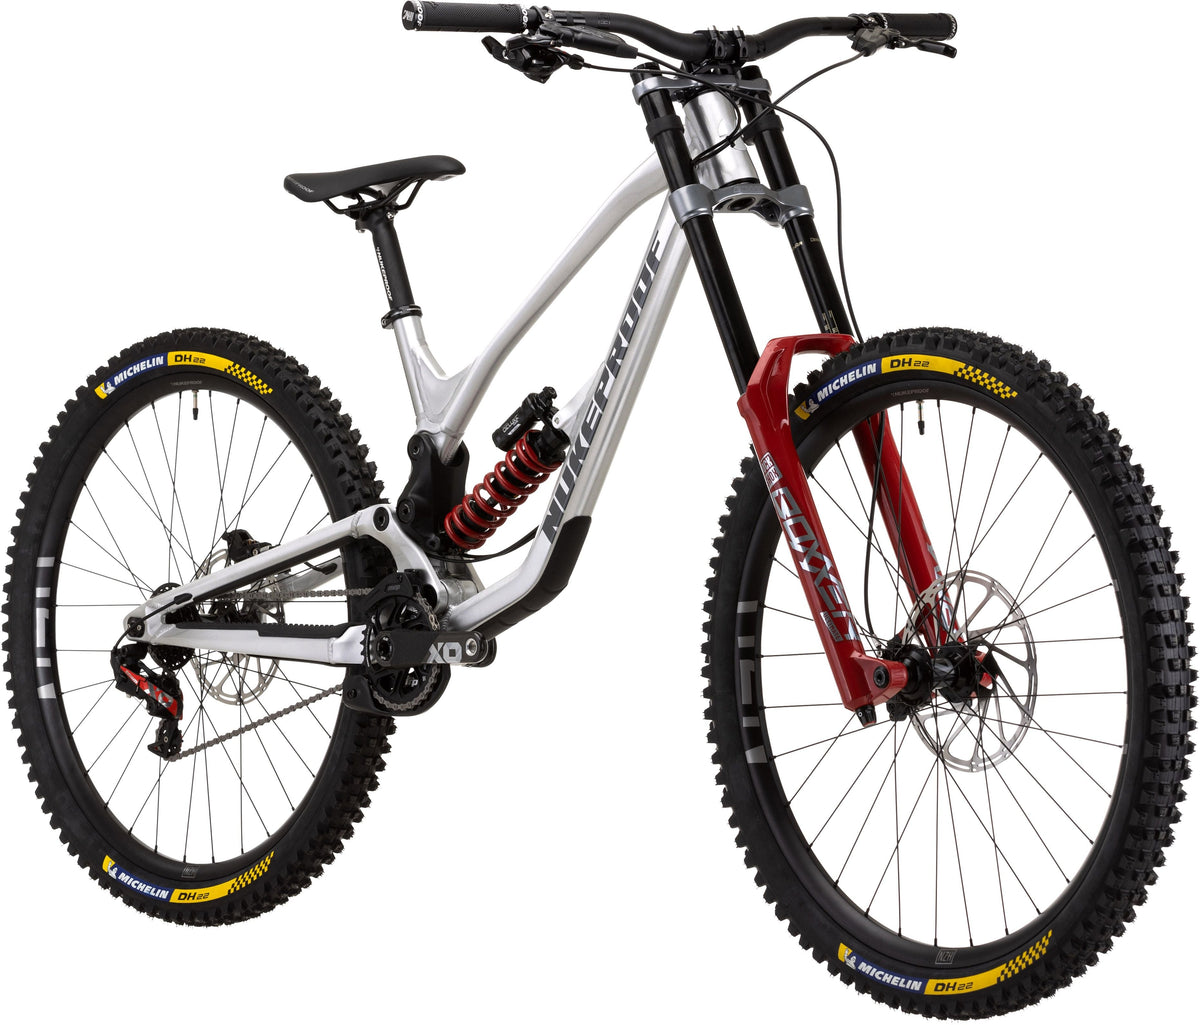 Nukeproof Dissent 290 RS